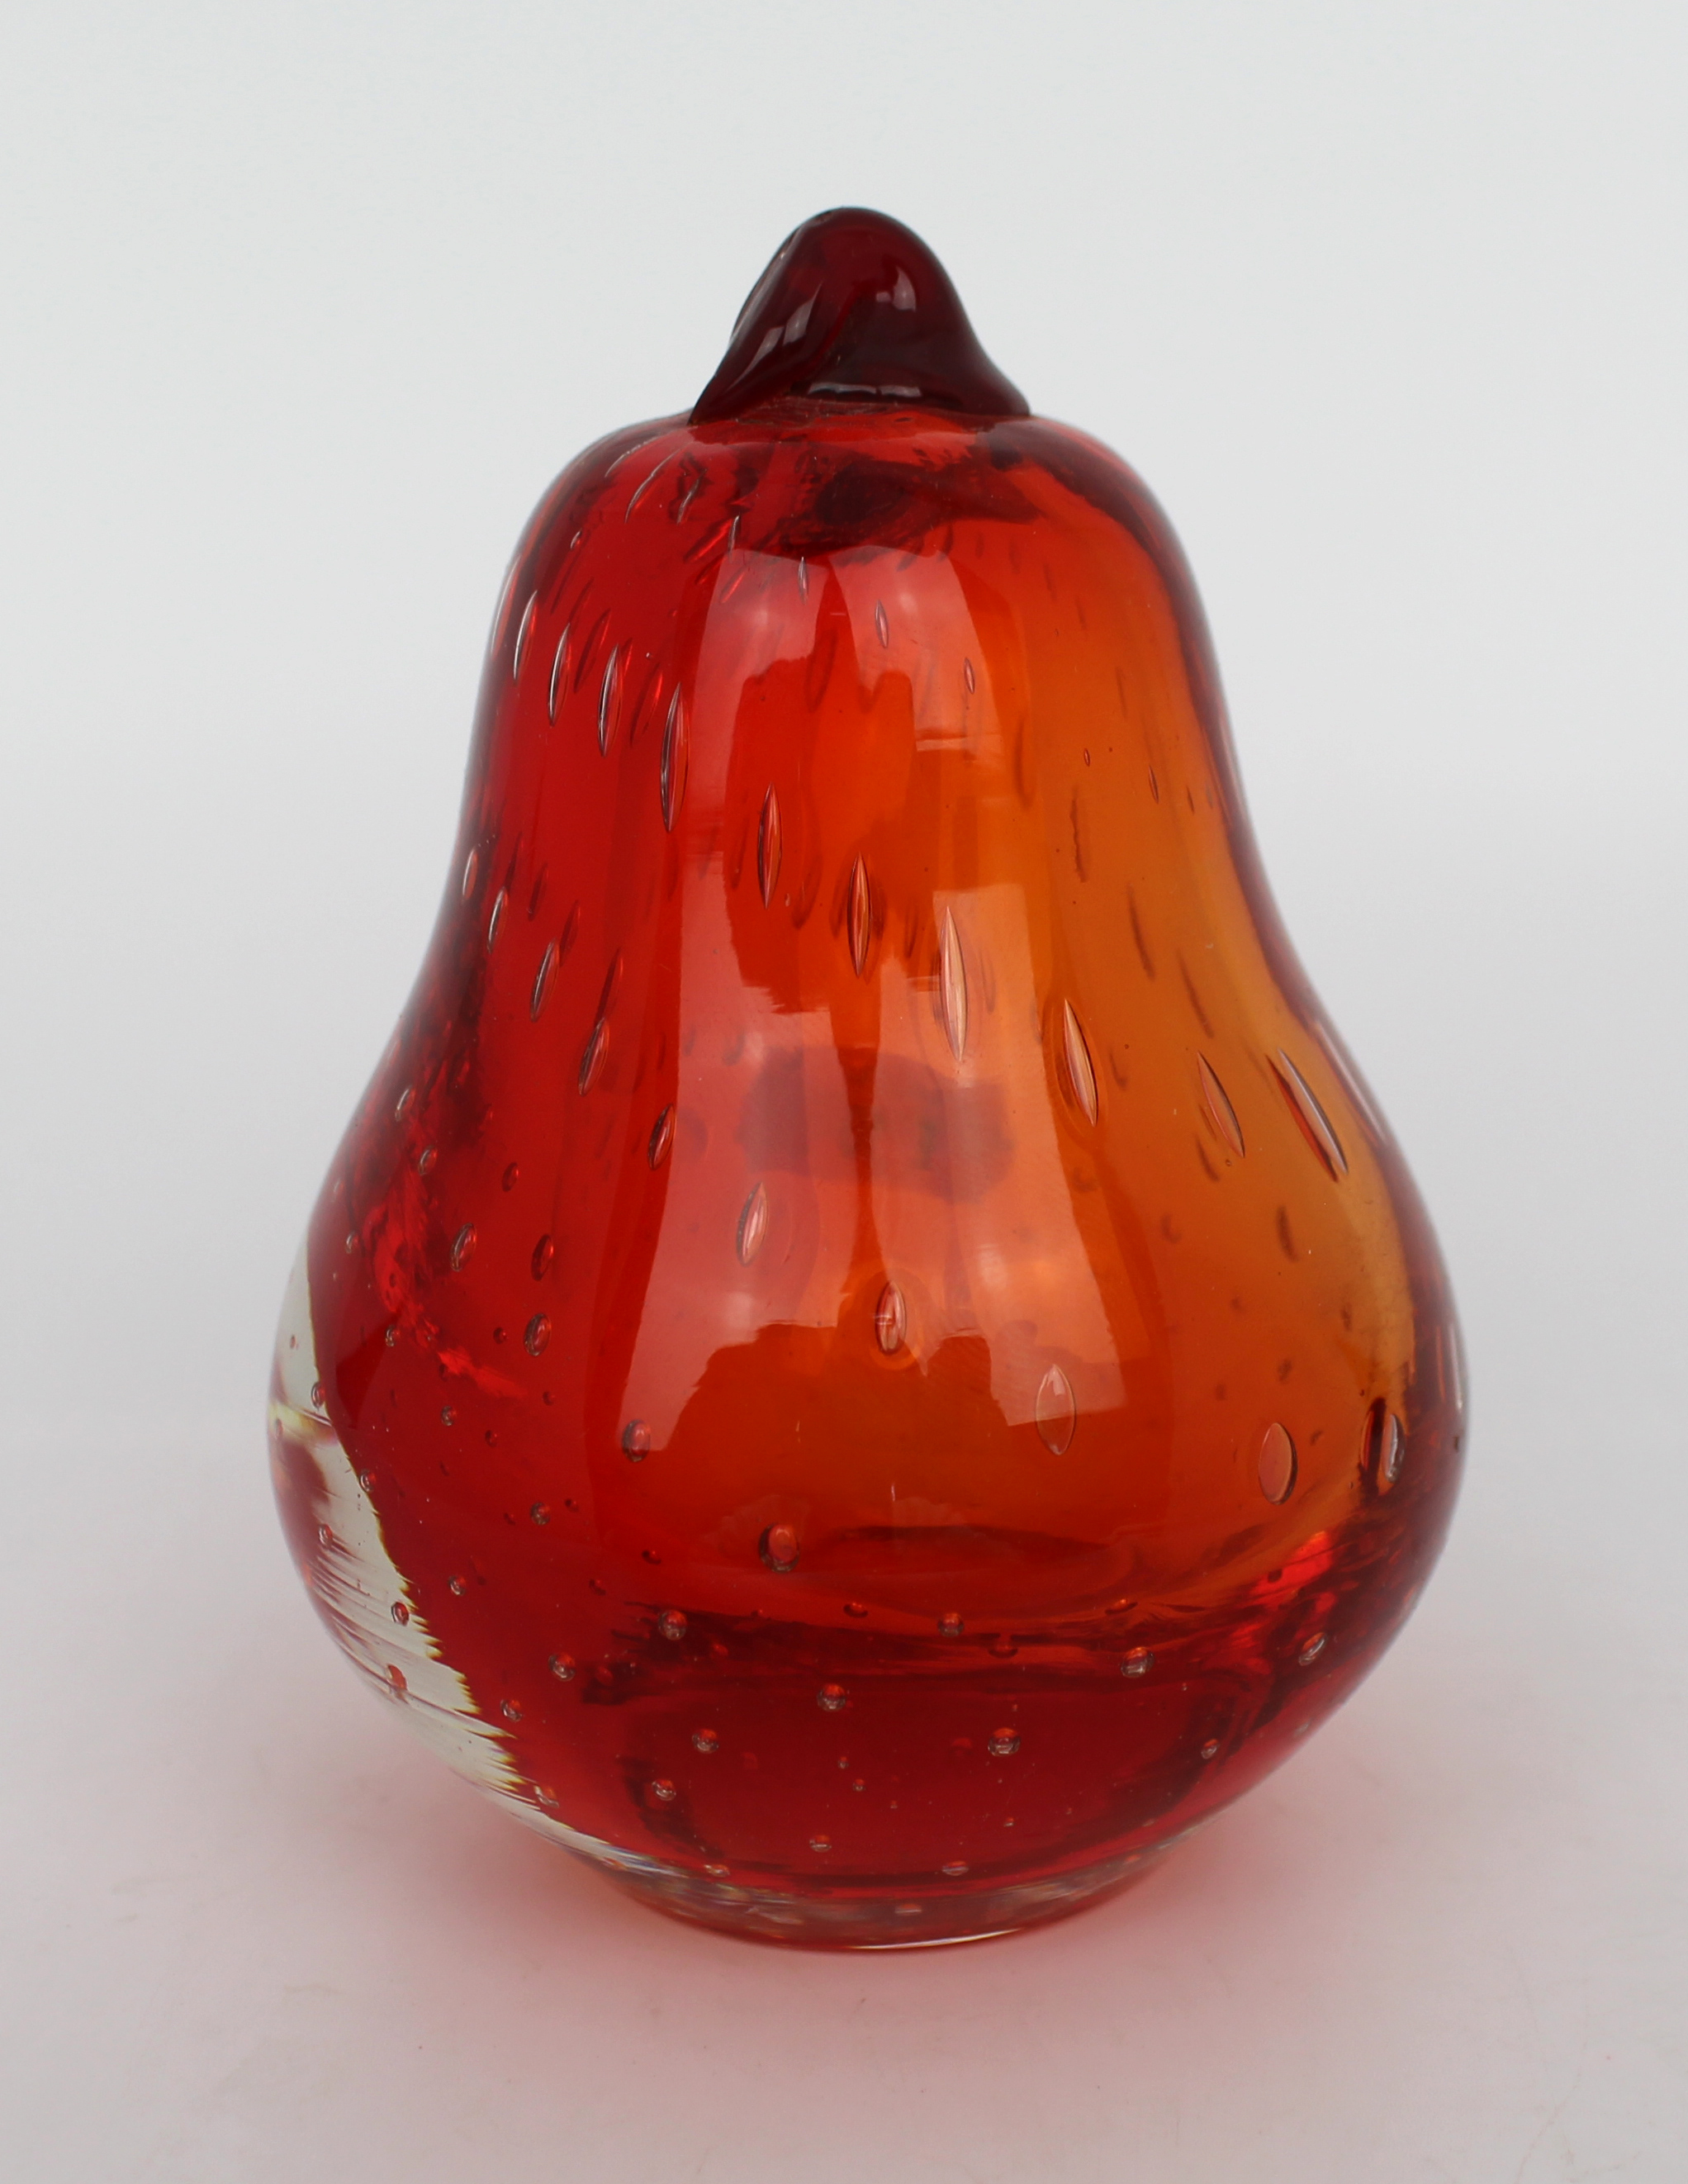 Vintage Glass Pear Form Paperweight